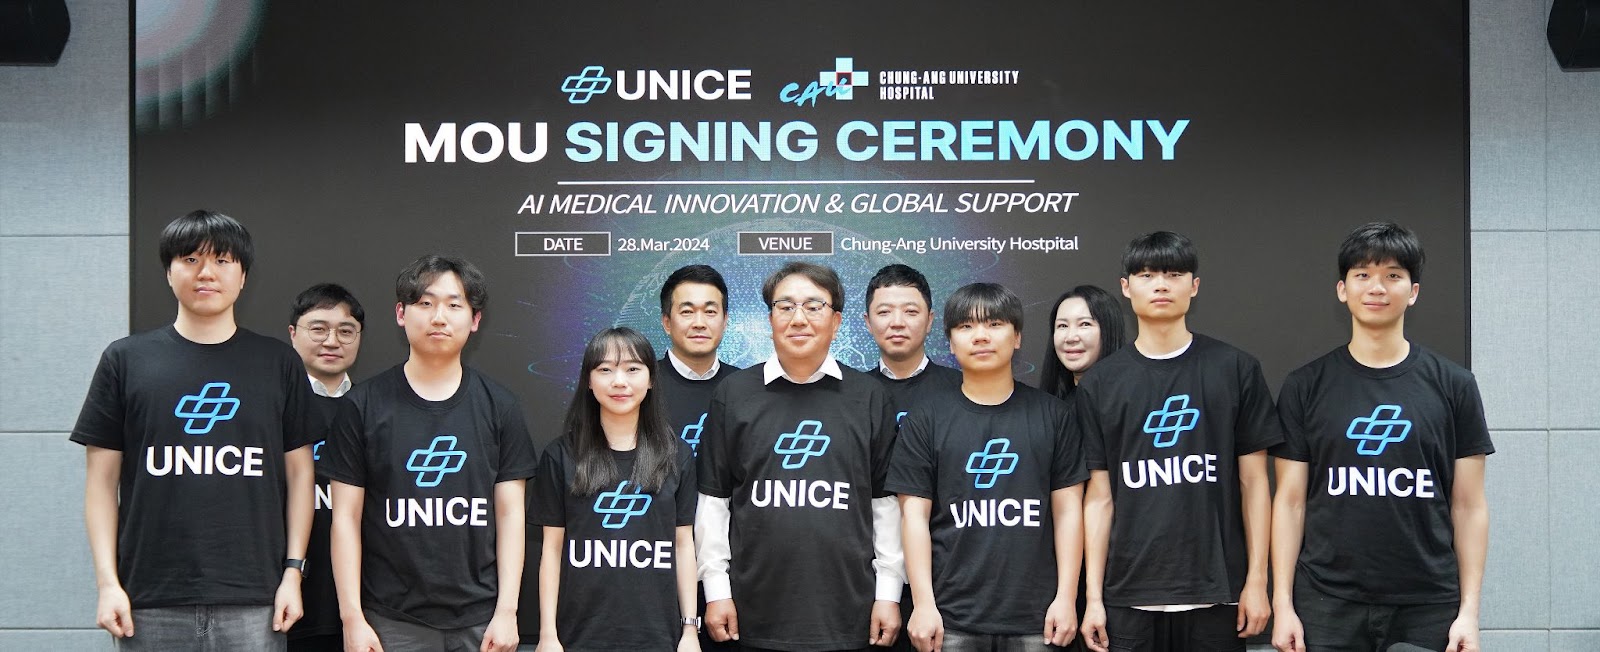 Unice Help AI Doctor Enters a New Era of Medical Validation with Chung-Ang University Hospital